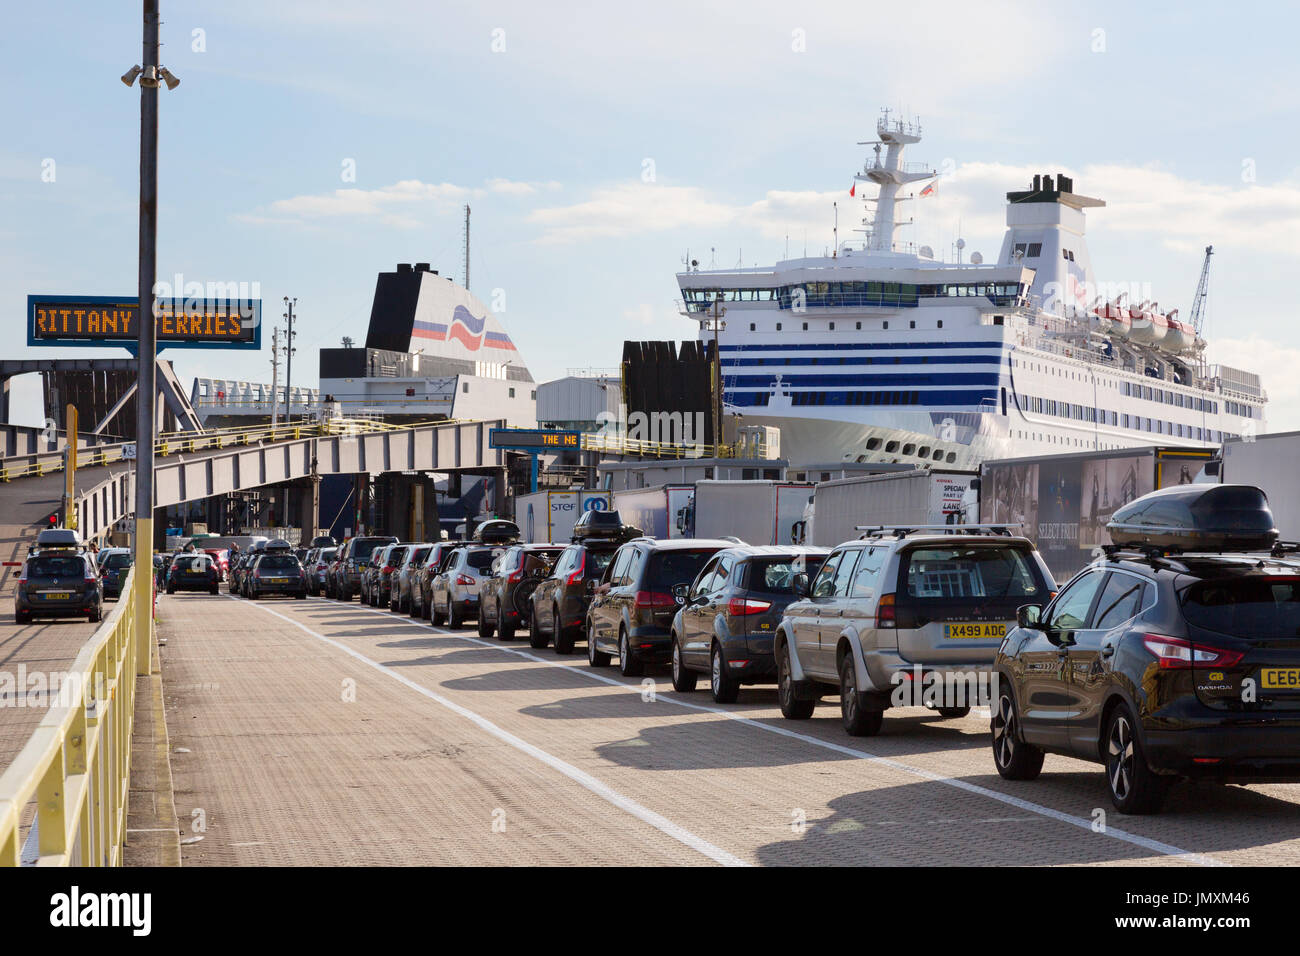 Cars waiting to board a car ferry, Portsmouth docks, Portsmouth UK Stock Photo